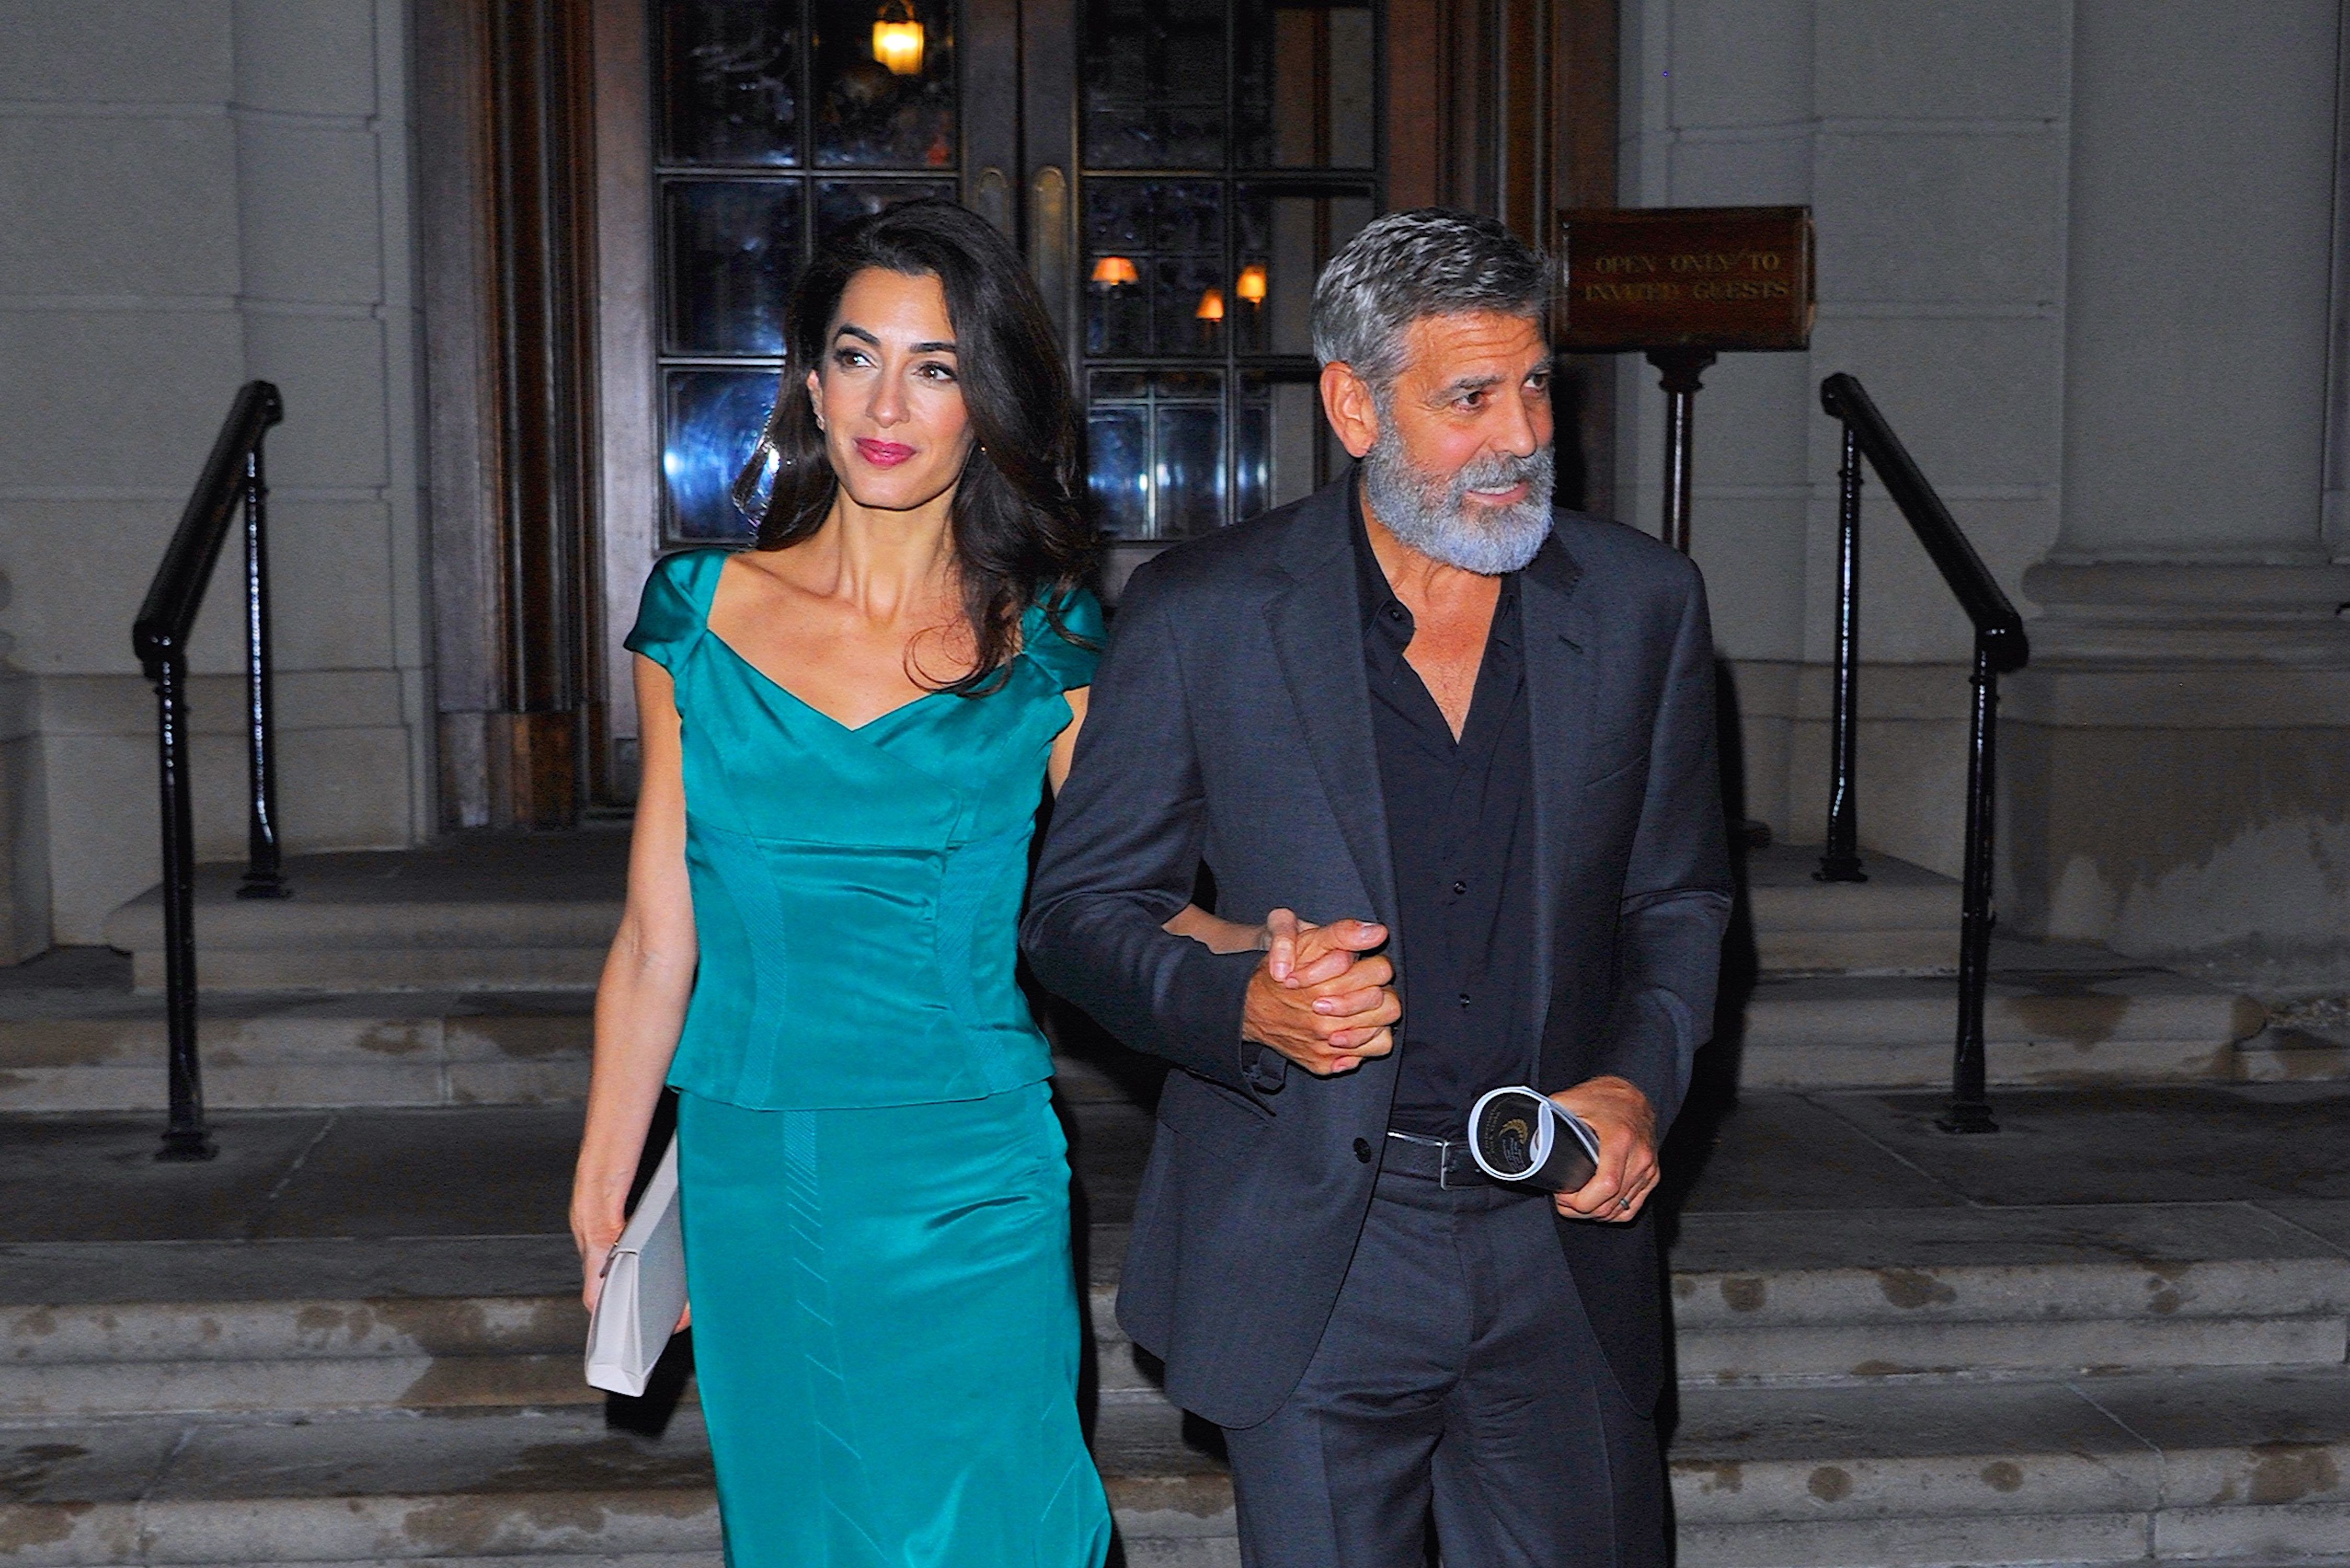 Image result for amal clooney in zac posen teal dress